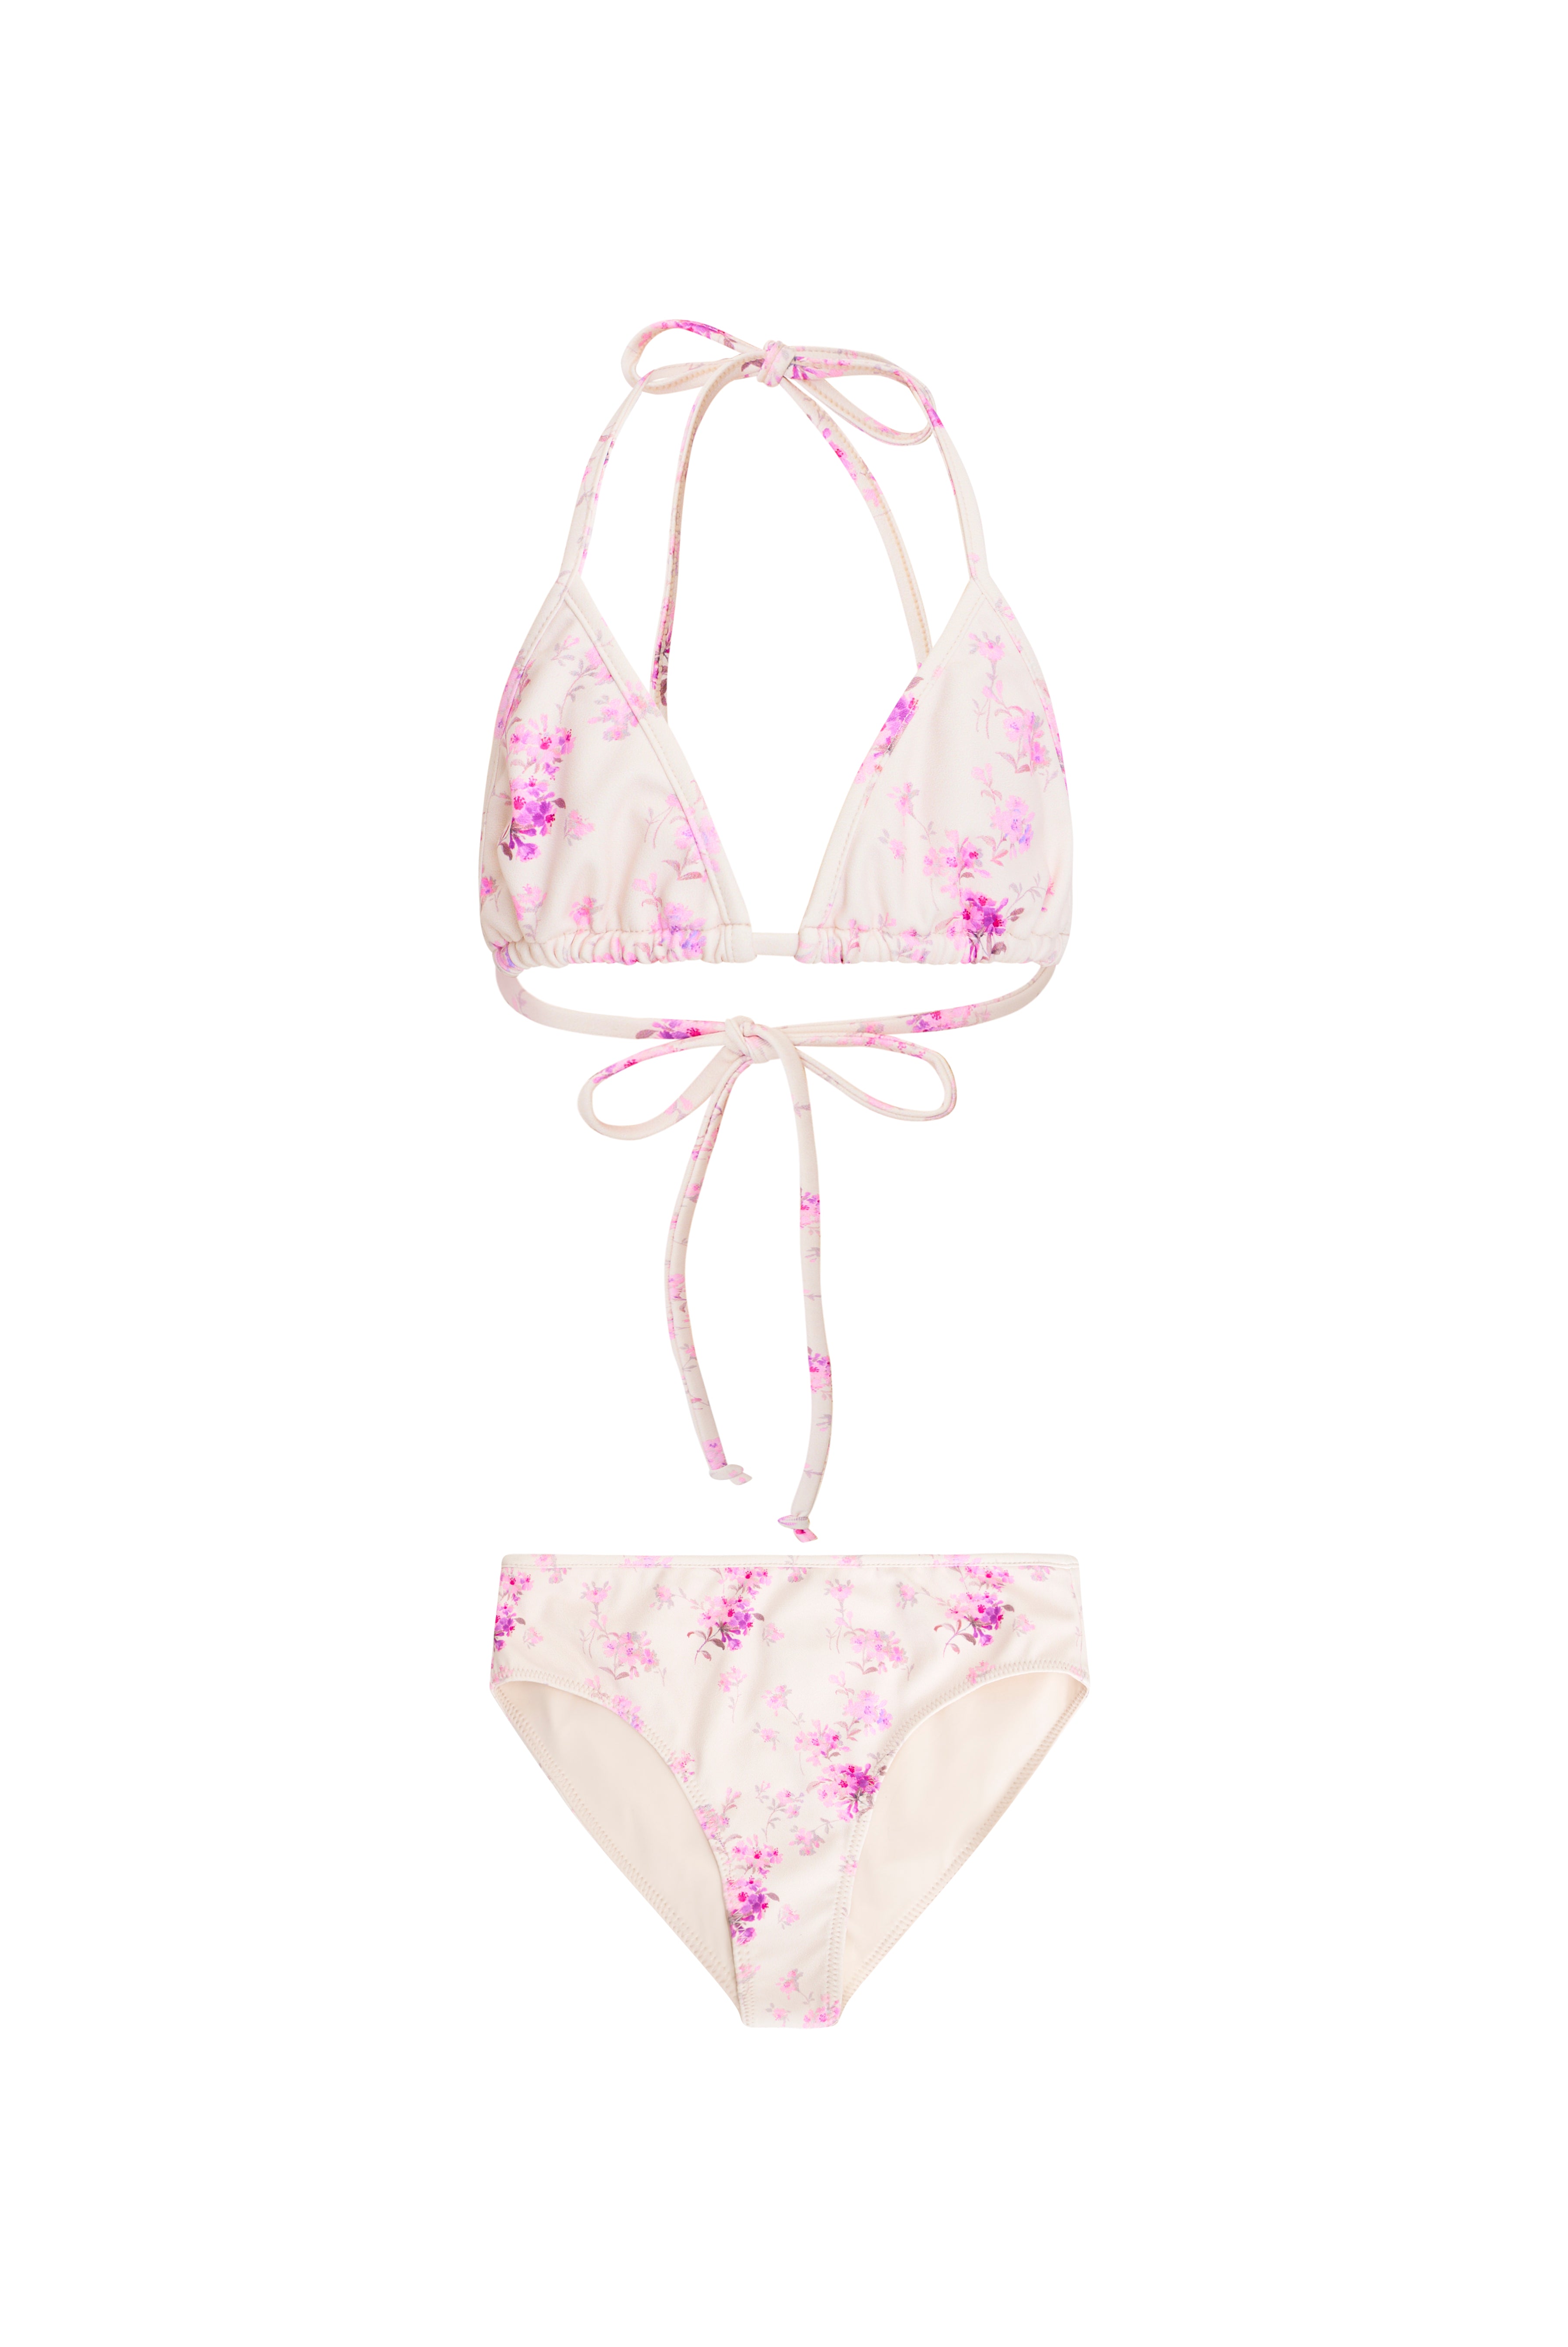 Halter top bikini with self tie detail and dainty floral print.